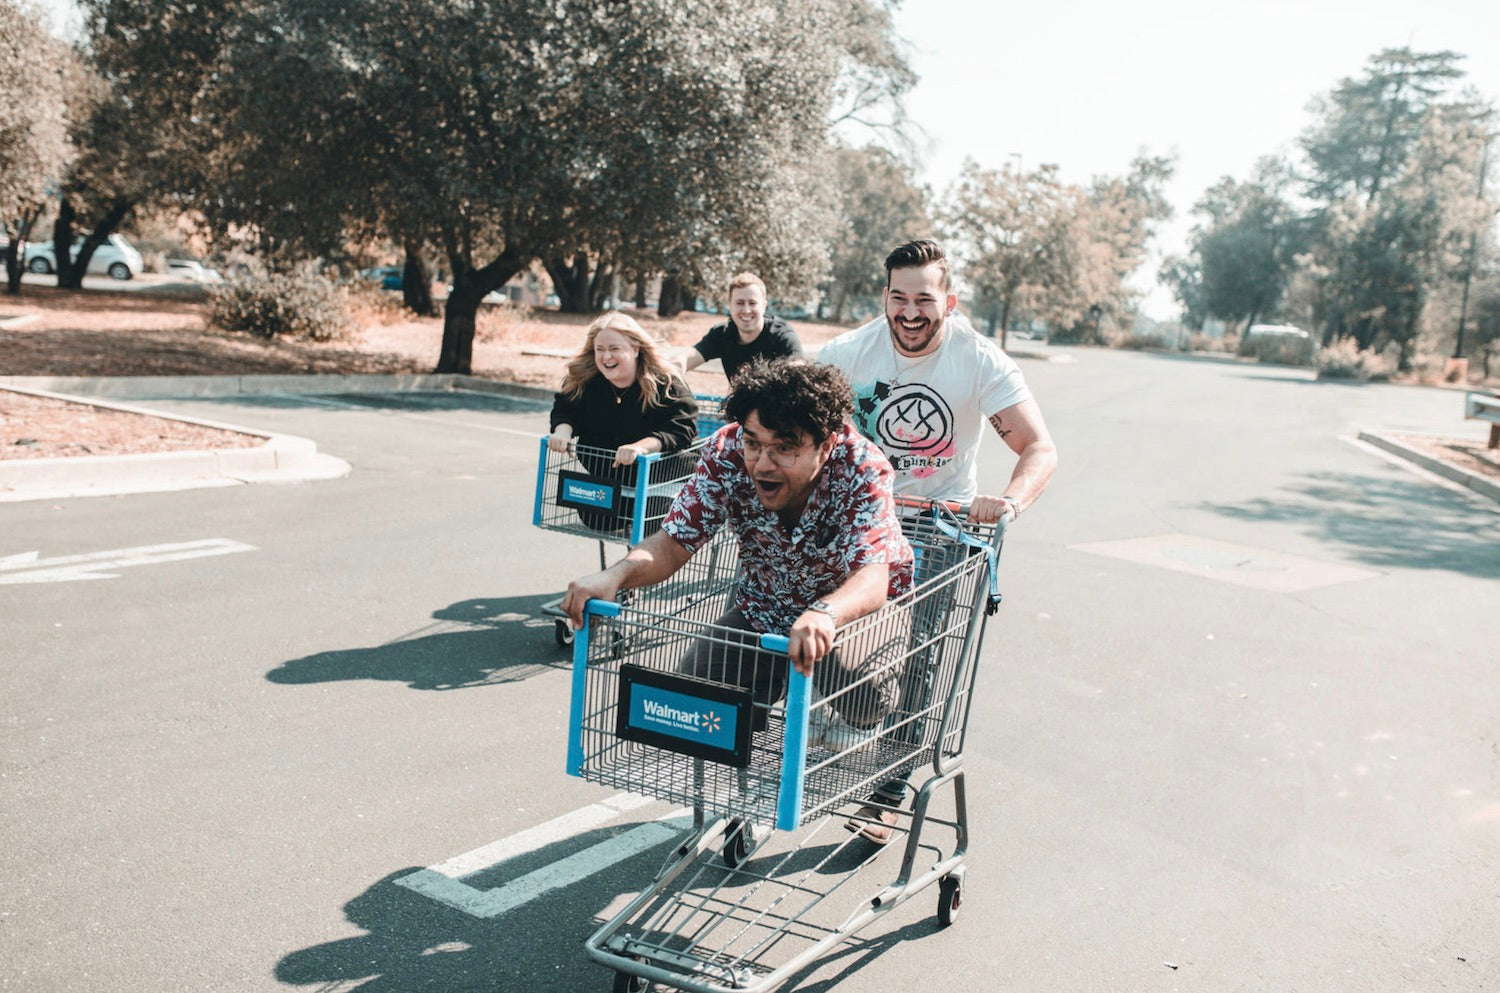 Friends push each other in shopping carts as they race down the street for a fun summer activity.